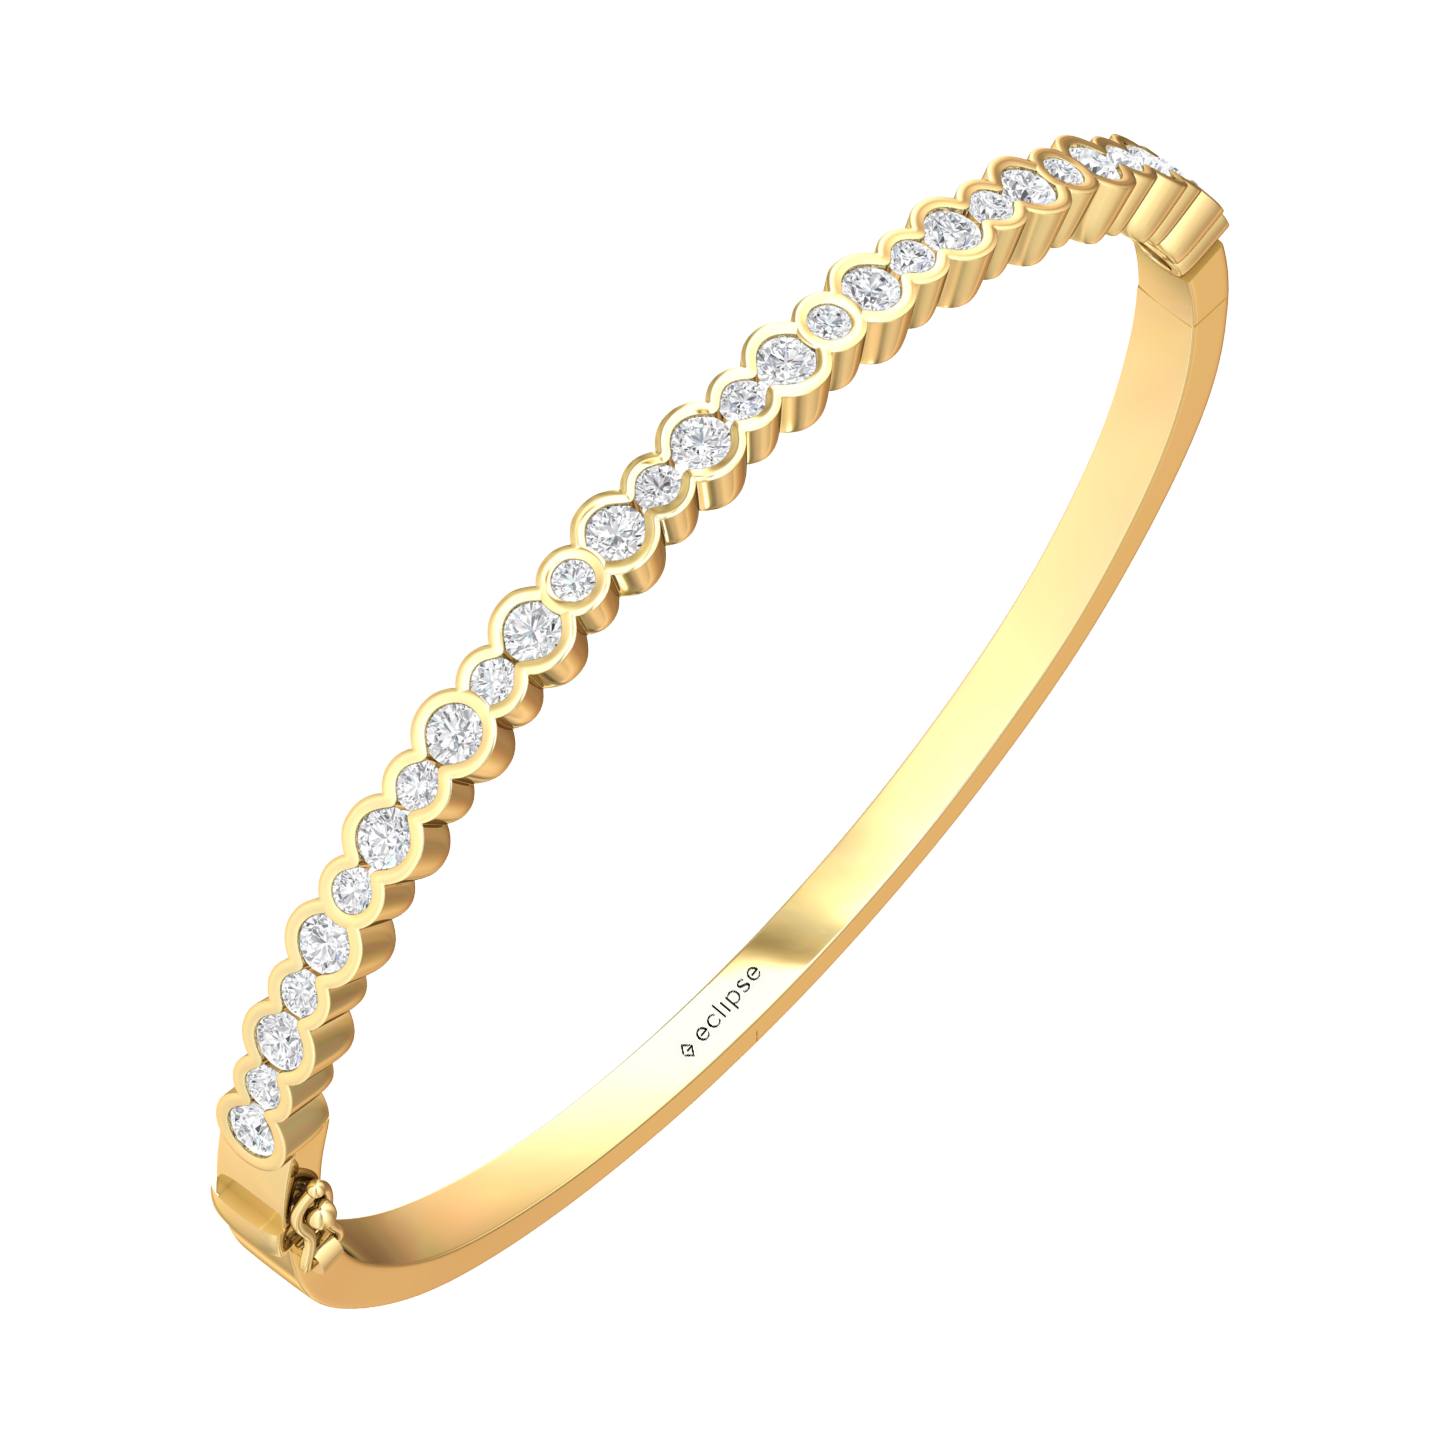 Eclipse Collection All Diamond Bangle  Gardiner Brothers 18ct Yellow Gold  